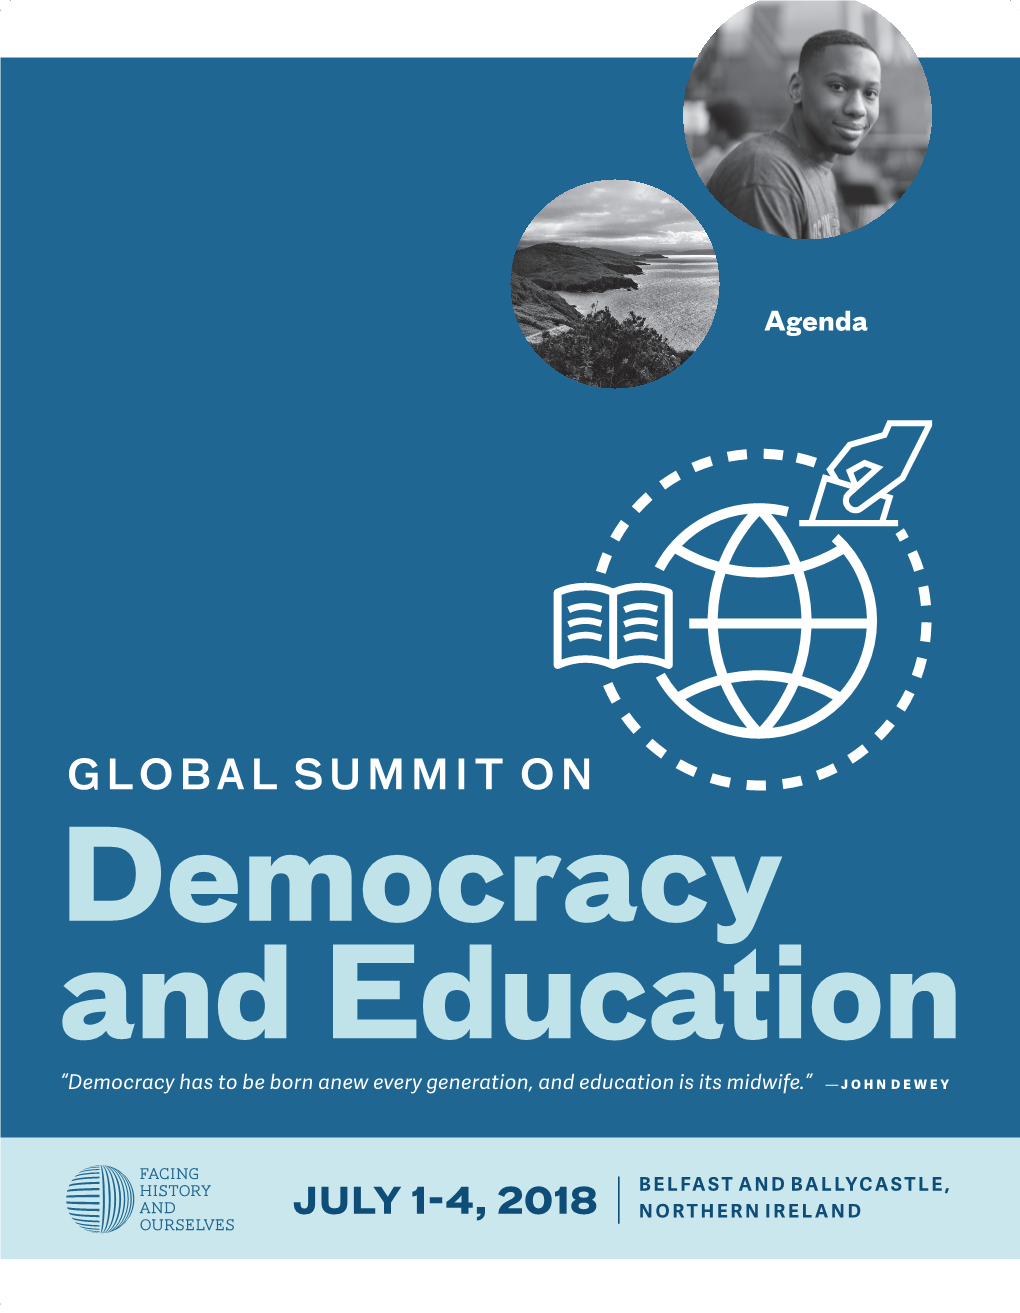 GLOBAL SUMMIT on Democracy and Education “Democracy Has to Be Born Anew Every Generation, and Education Is Its Midwife.” — JOHN DEWEY